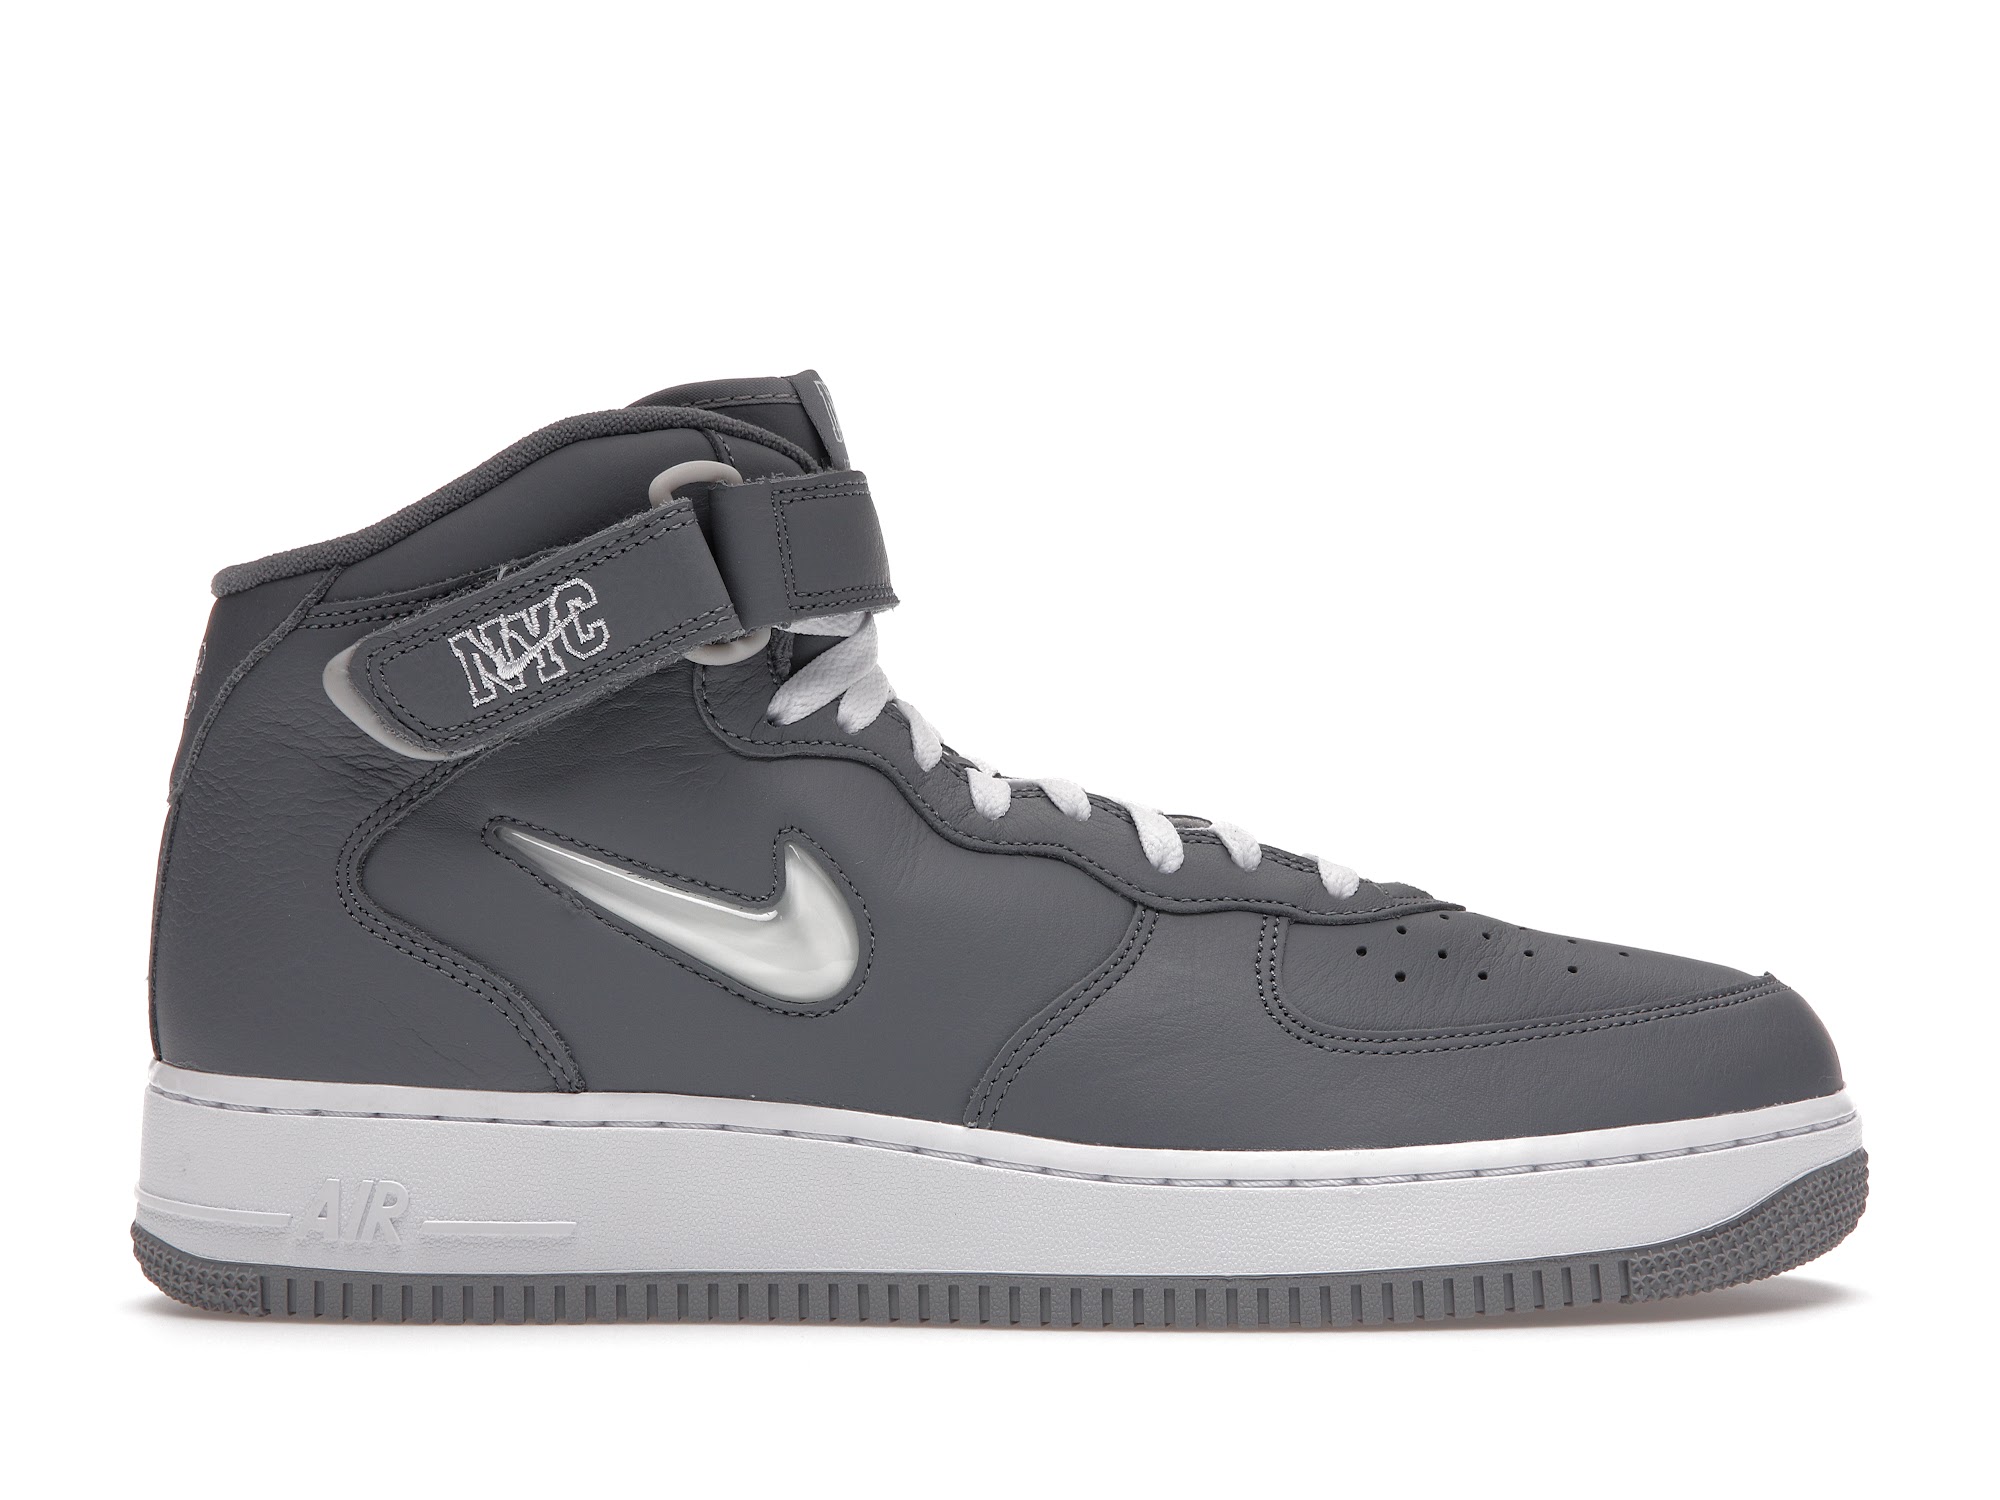 Nike Air Force 1 Mid QS Jewel NYC Cool Grey Men's - DH5622-001 - US